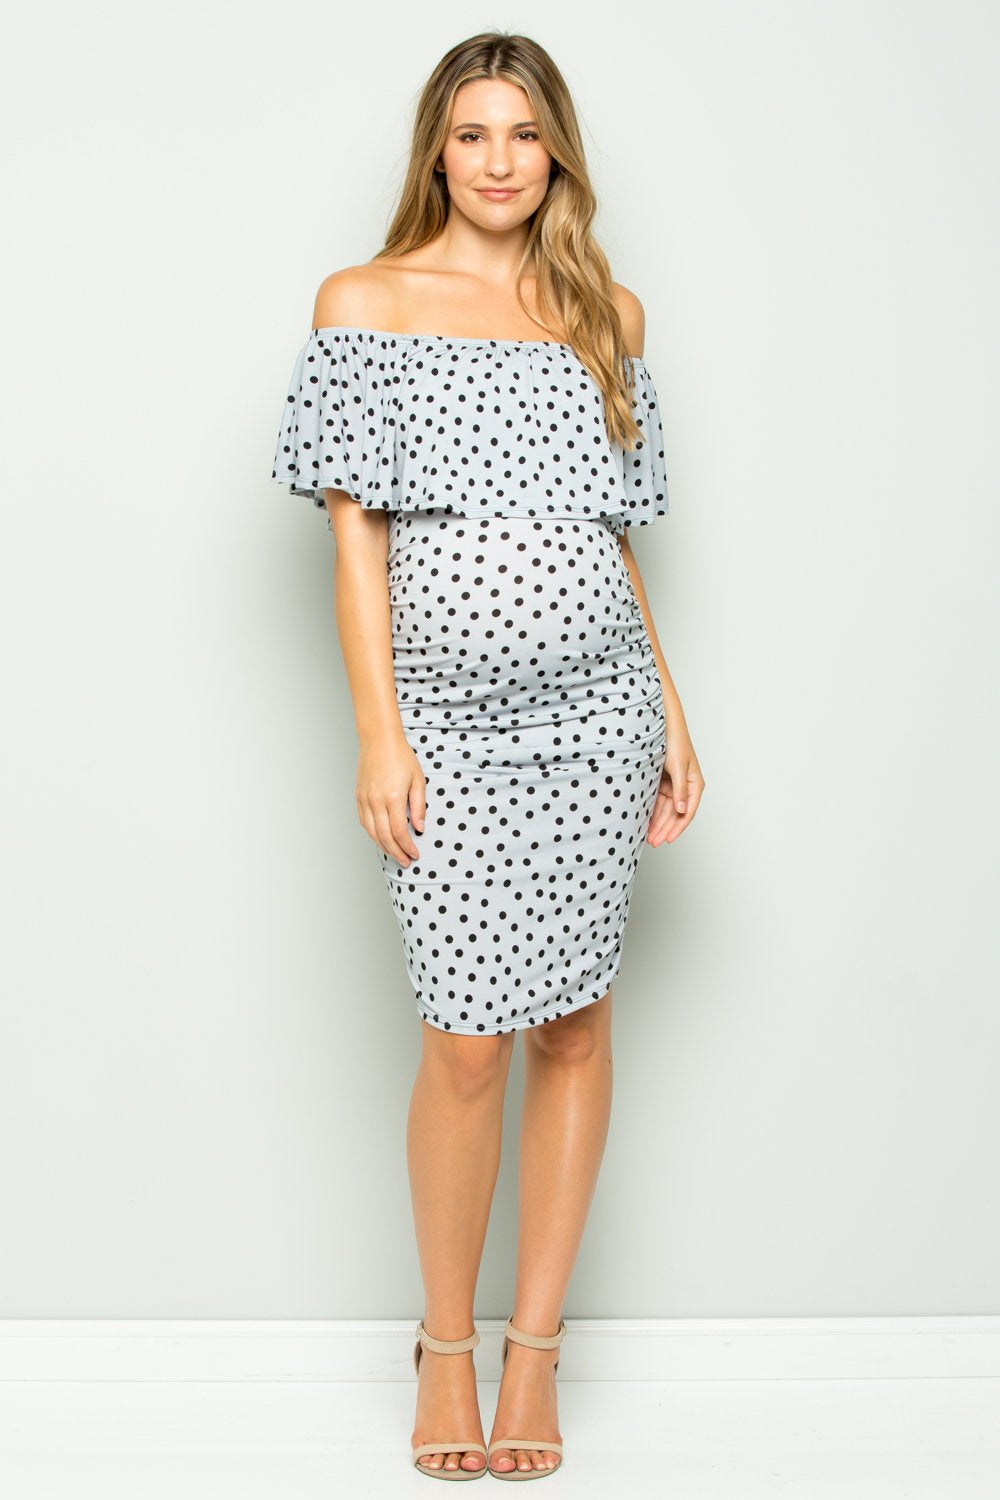 maternity pregnancy baby shower polka dot off shoulder ruffle neck above knee summer cocktail bodycon dress